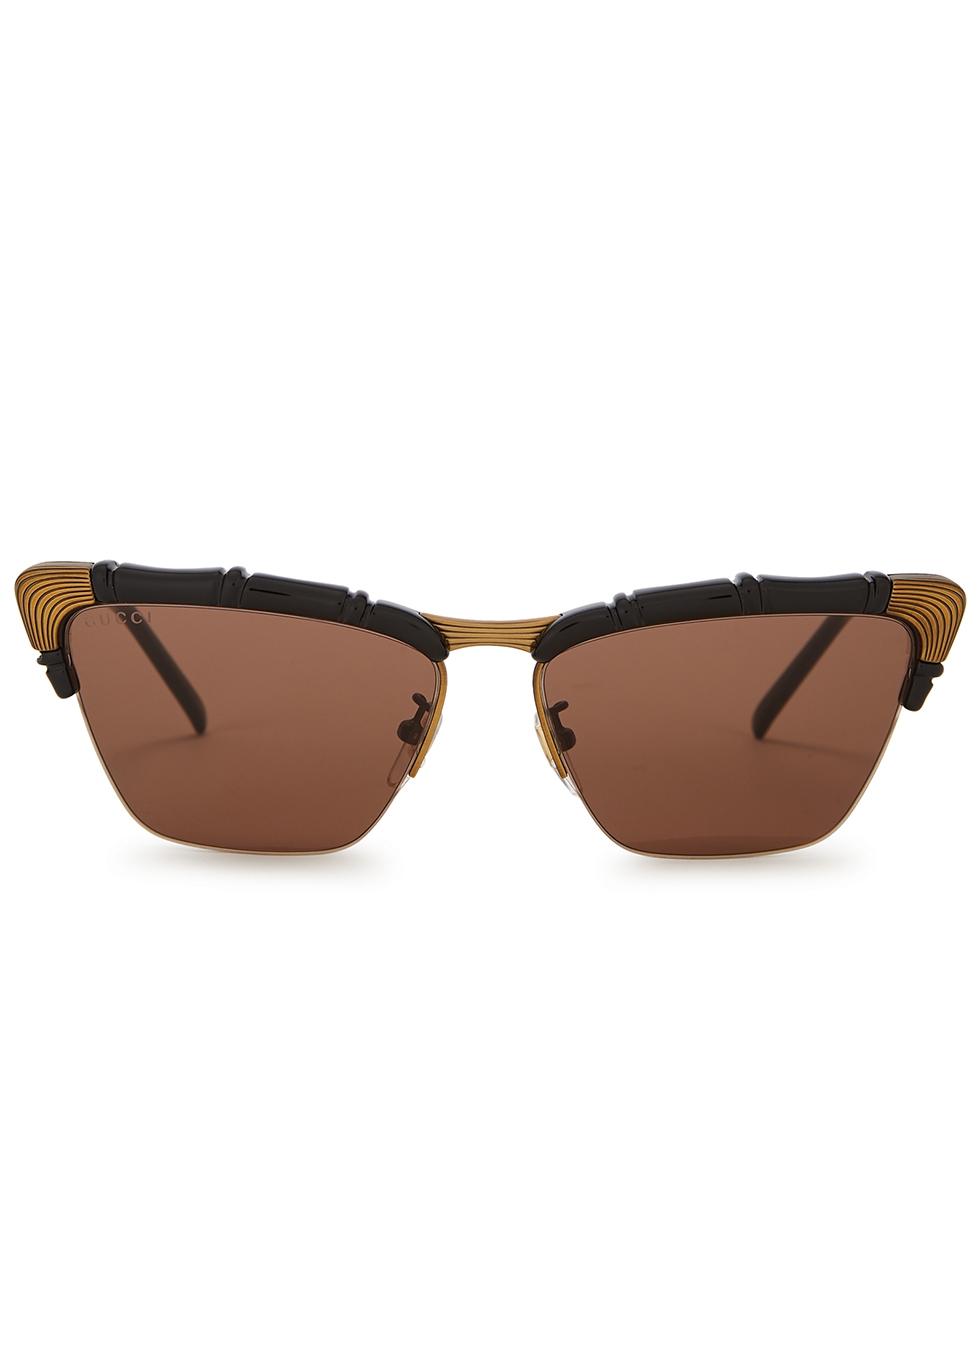 Gucci Bamboo-effect Cat-eye Sunglasses in Black Gold/Brown 